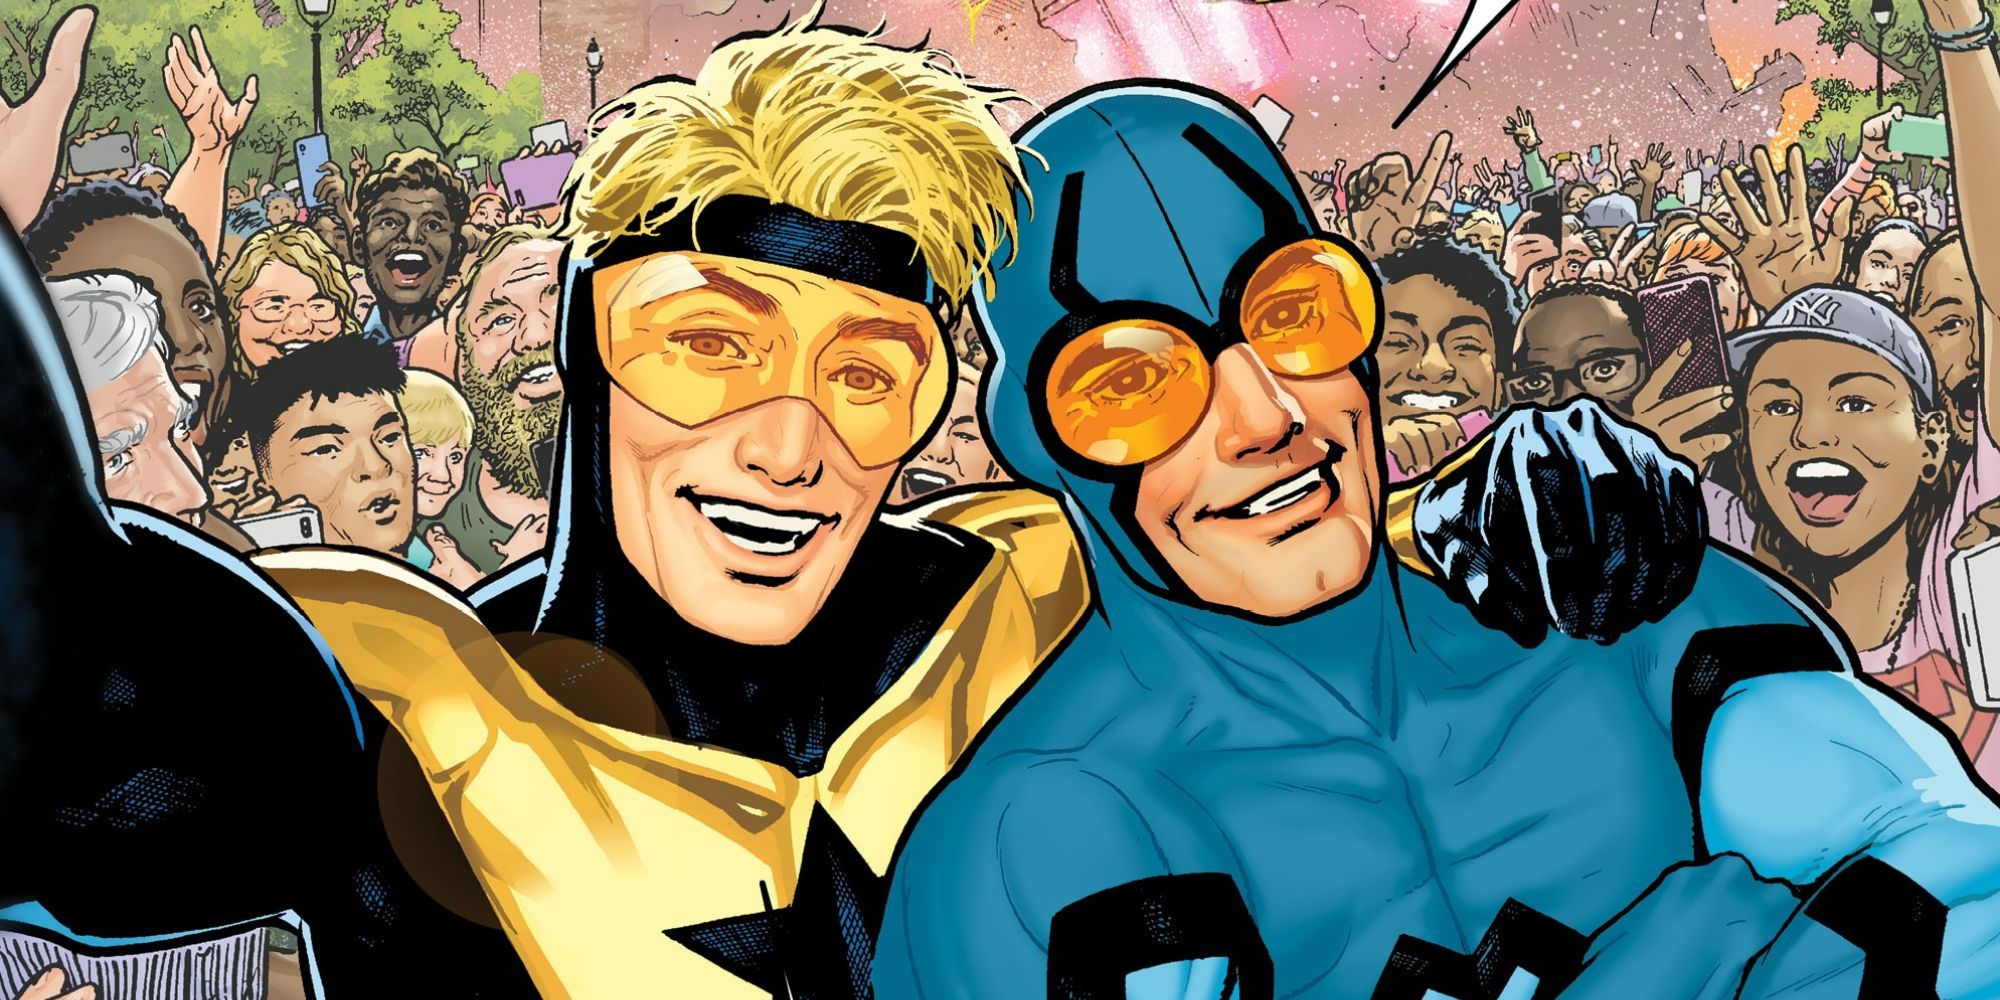 Blue Beetle and Booster Gold surrounded by a cheering crowd in Blue and Gold